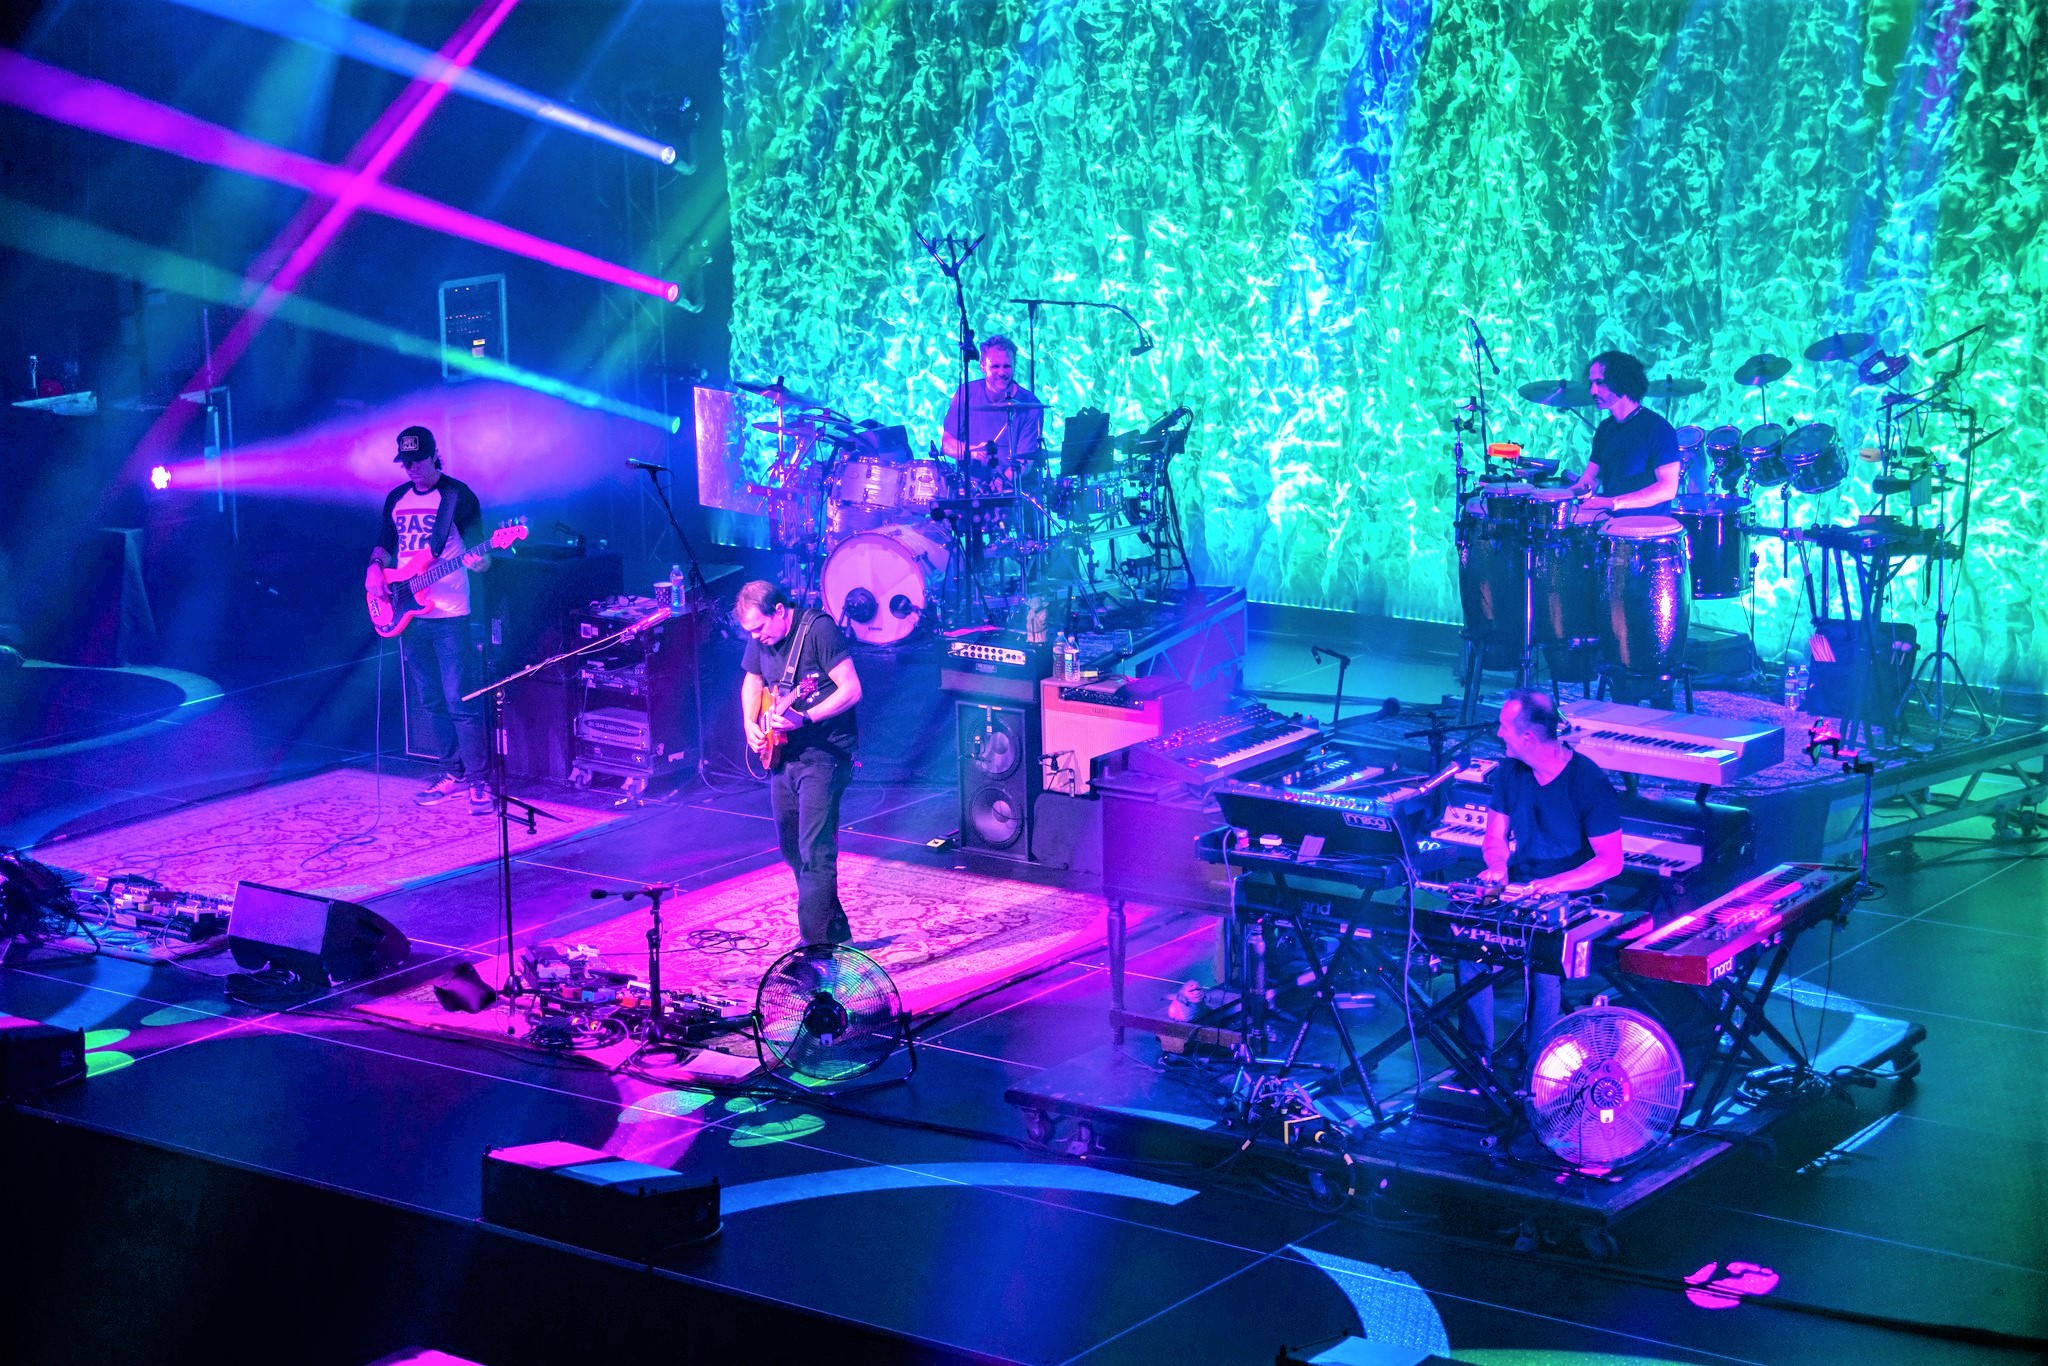 The Show Must Go On - Umphrey’s McGee perform with one man down at Ovation in Newport, KY